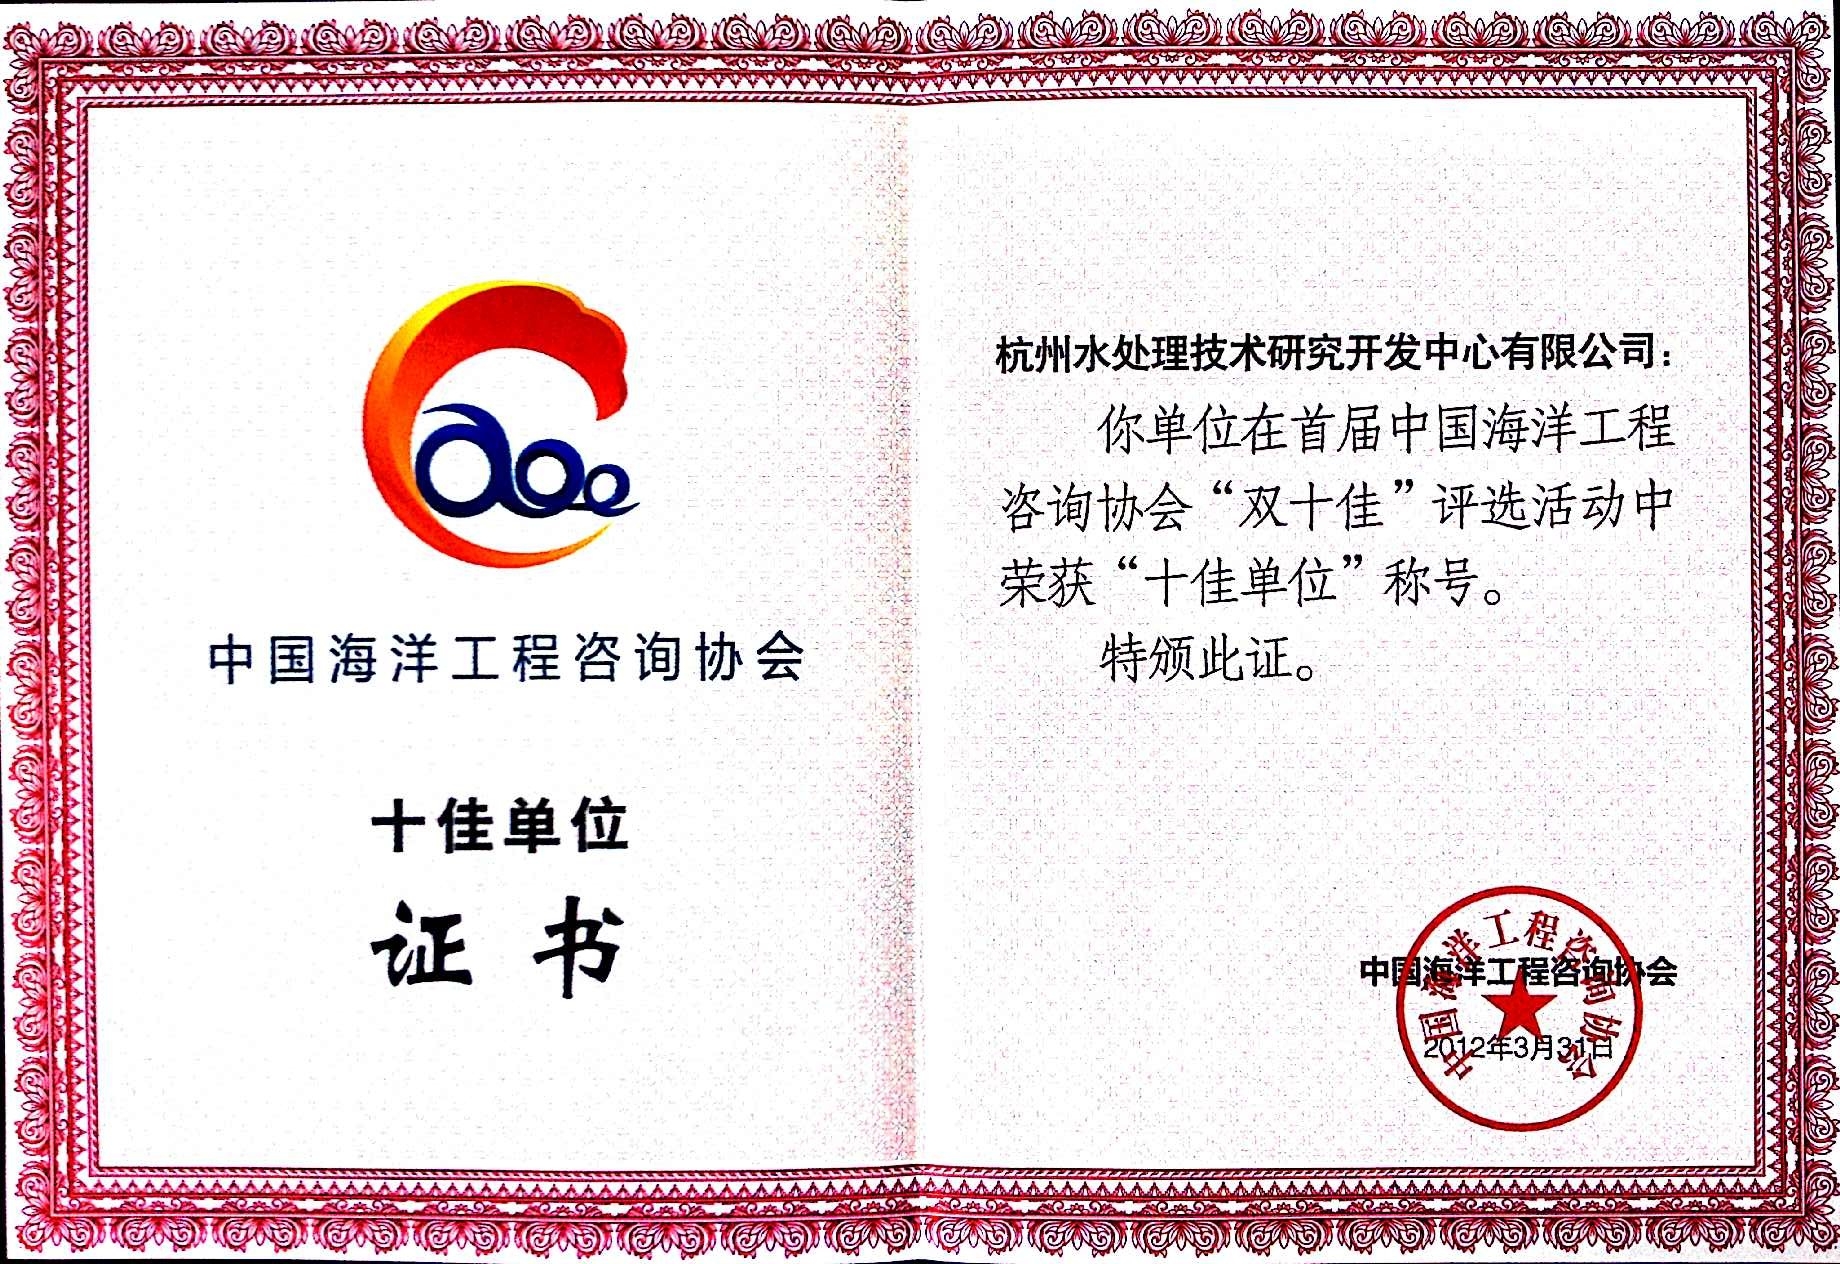 Top Ten Units of China Association of Oceanic Engineering